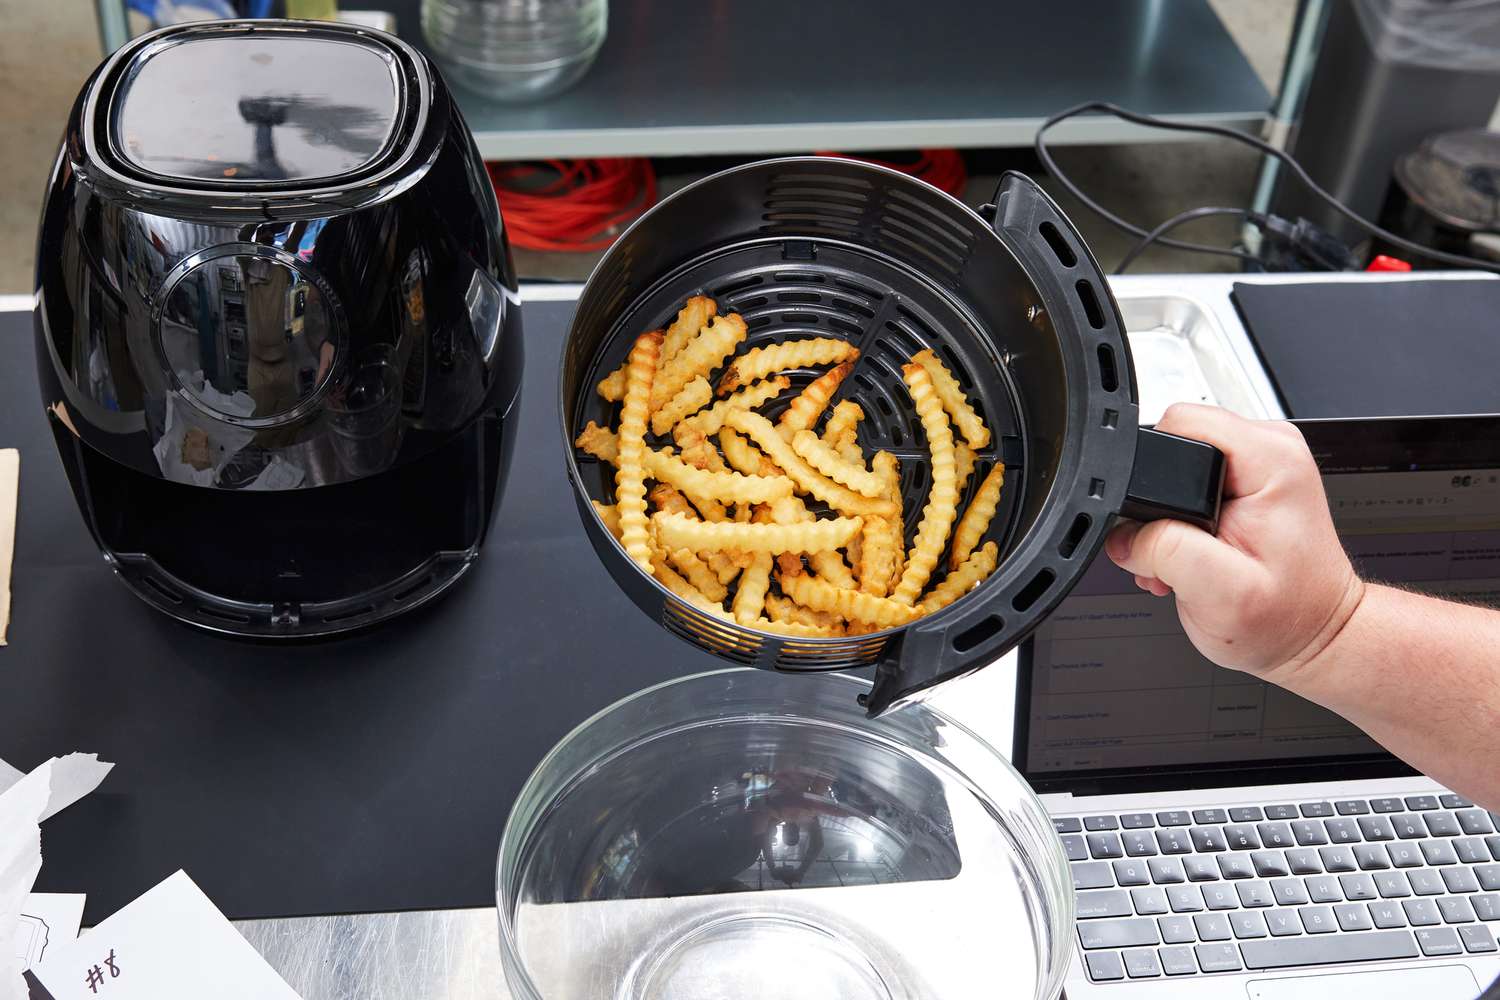 Hand holding a basket of fries from the Chefman TurboFry 3.7-Quart Air Fryer